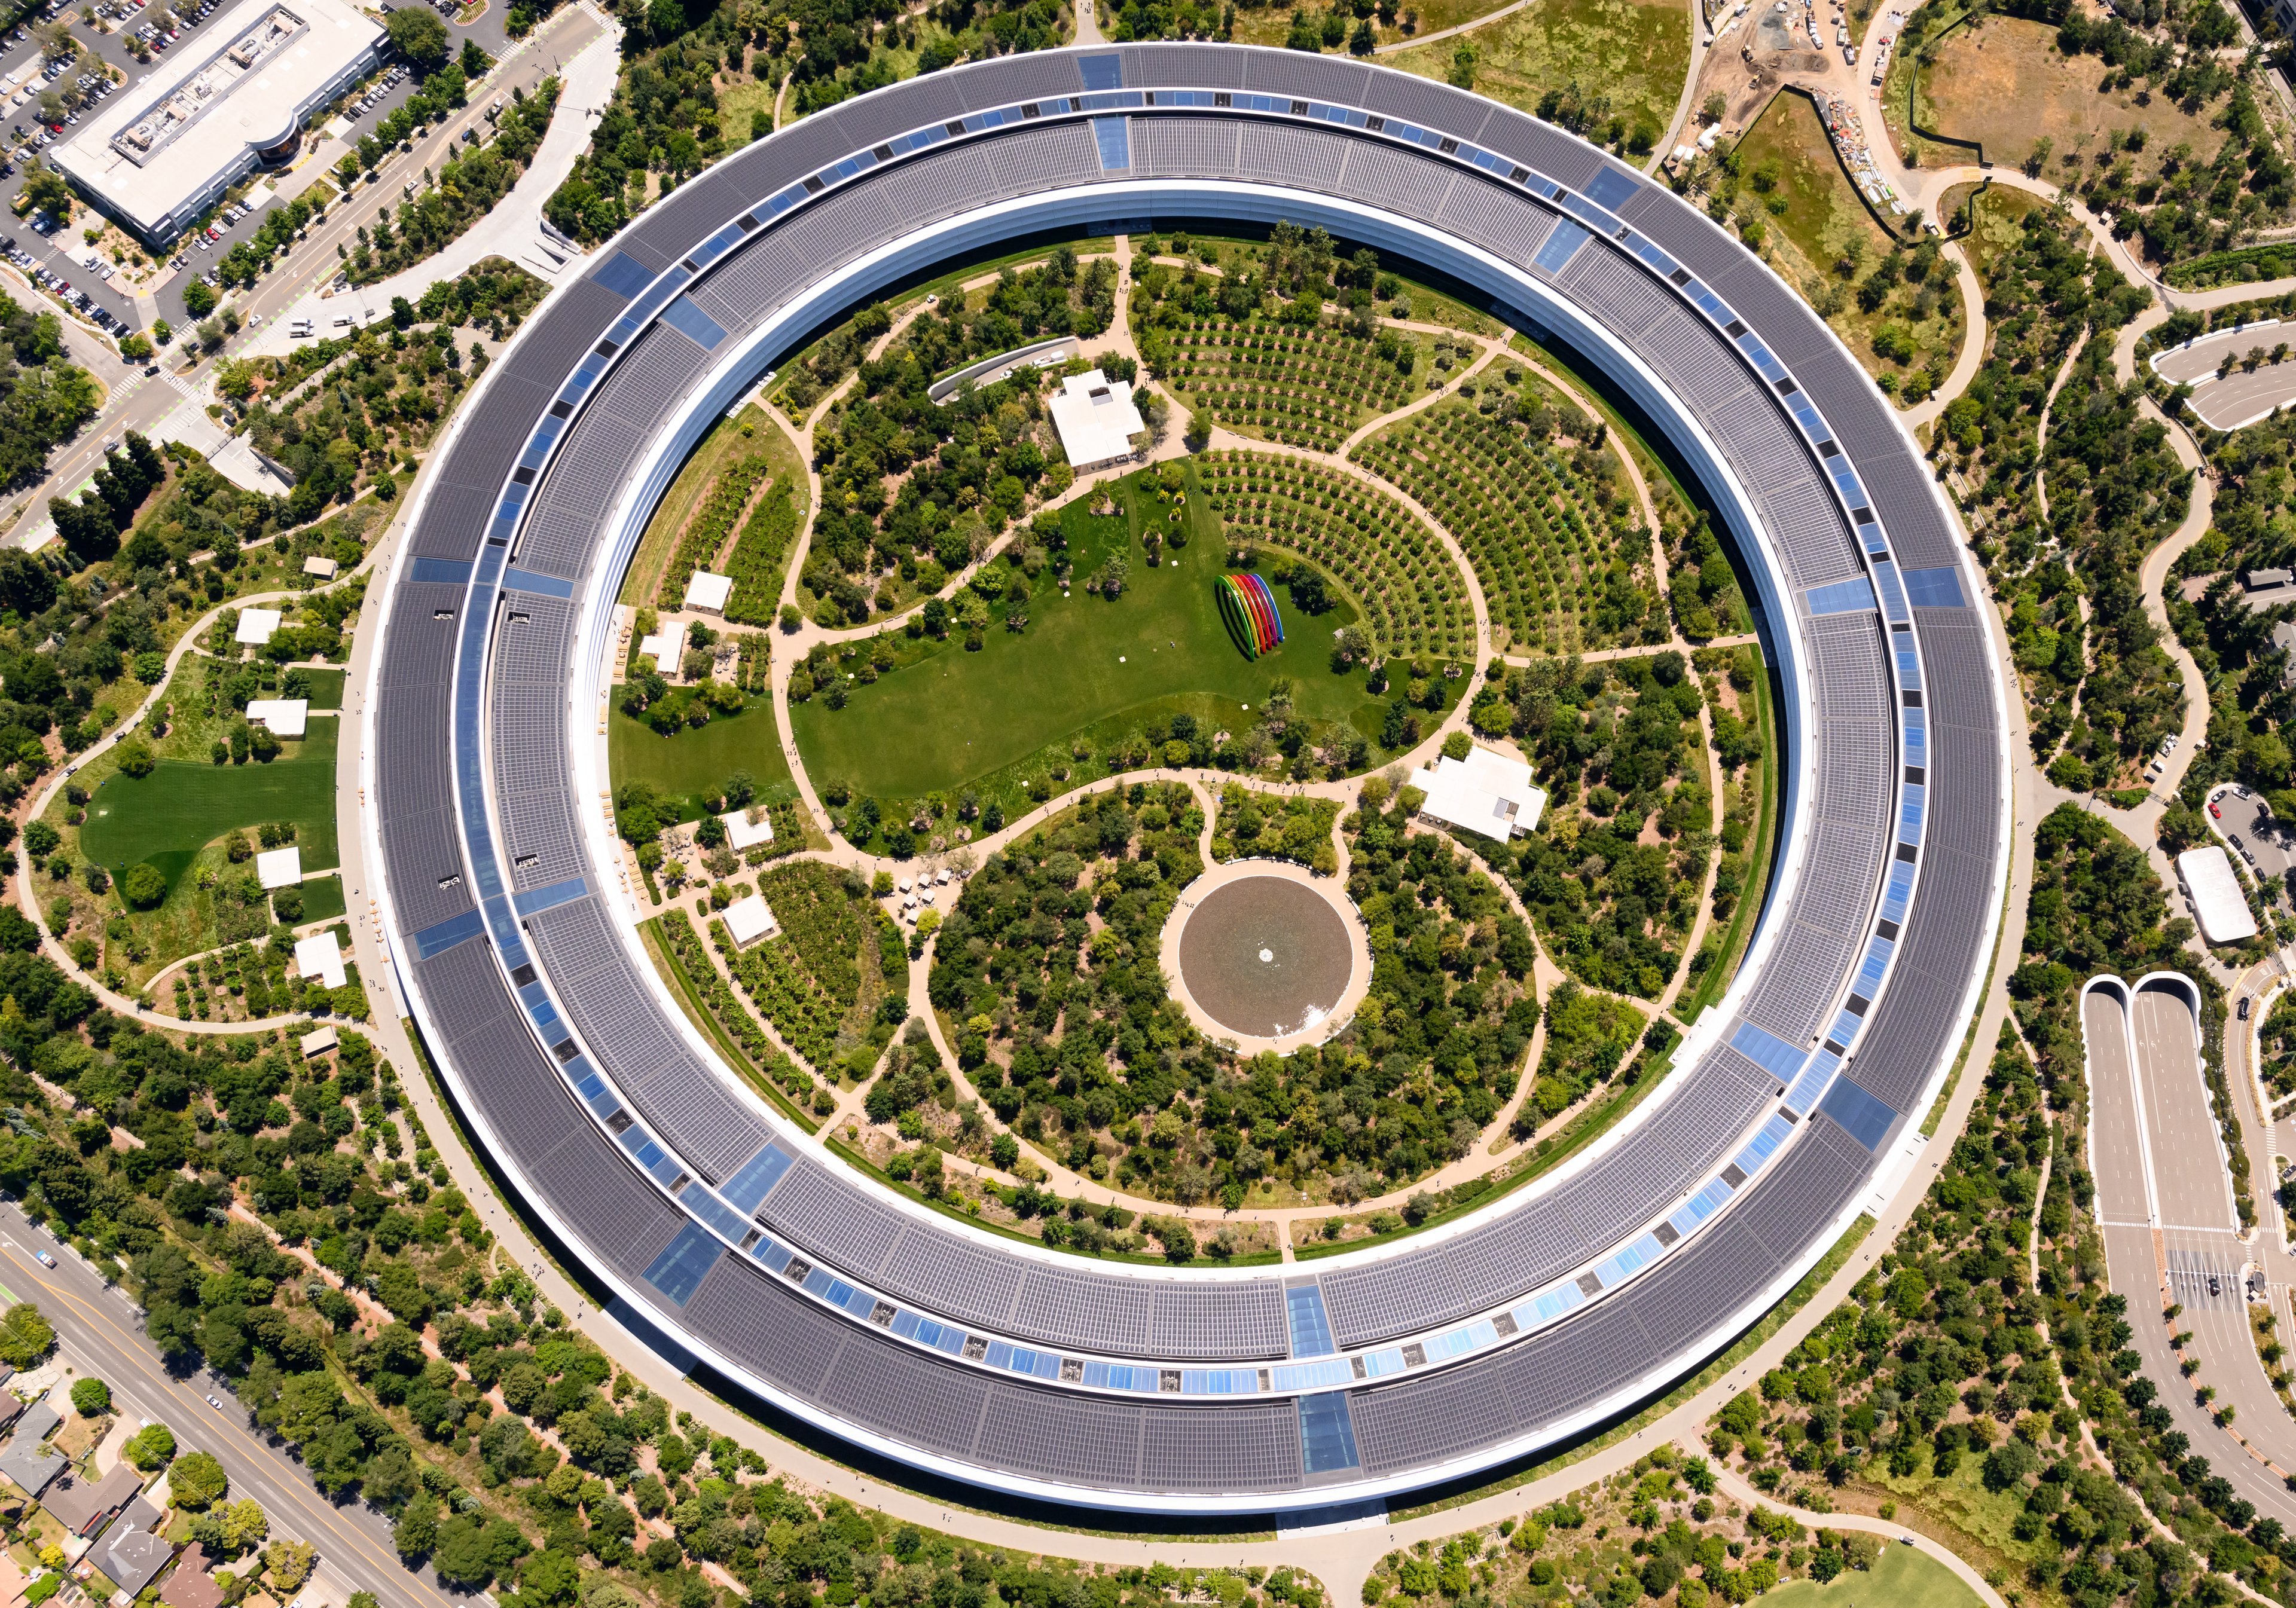 TOPSHOT - Apple Park, Apple's circular HQ office building, is seen in an aerial view over Cupertino, California on May 16, 2024. (Photo by JOSH EDELSON / AFP) (Photo by JOSH EDELSON/AFP via Getty Images)